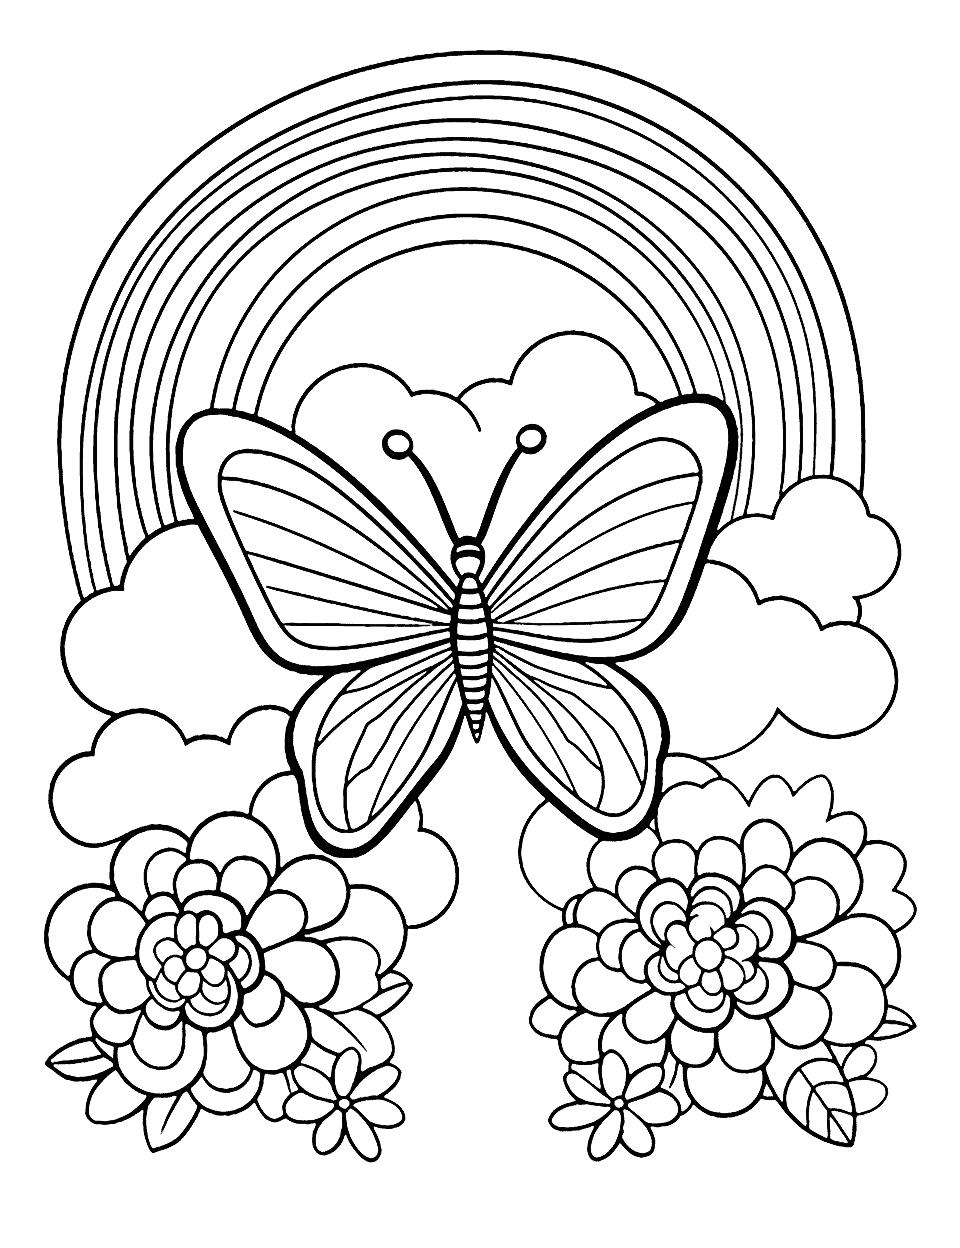 Rainbow Flower Coloring Page